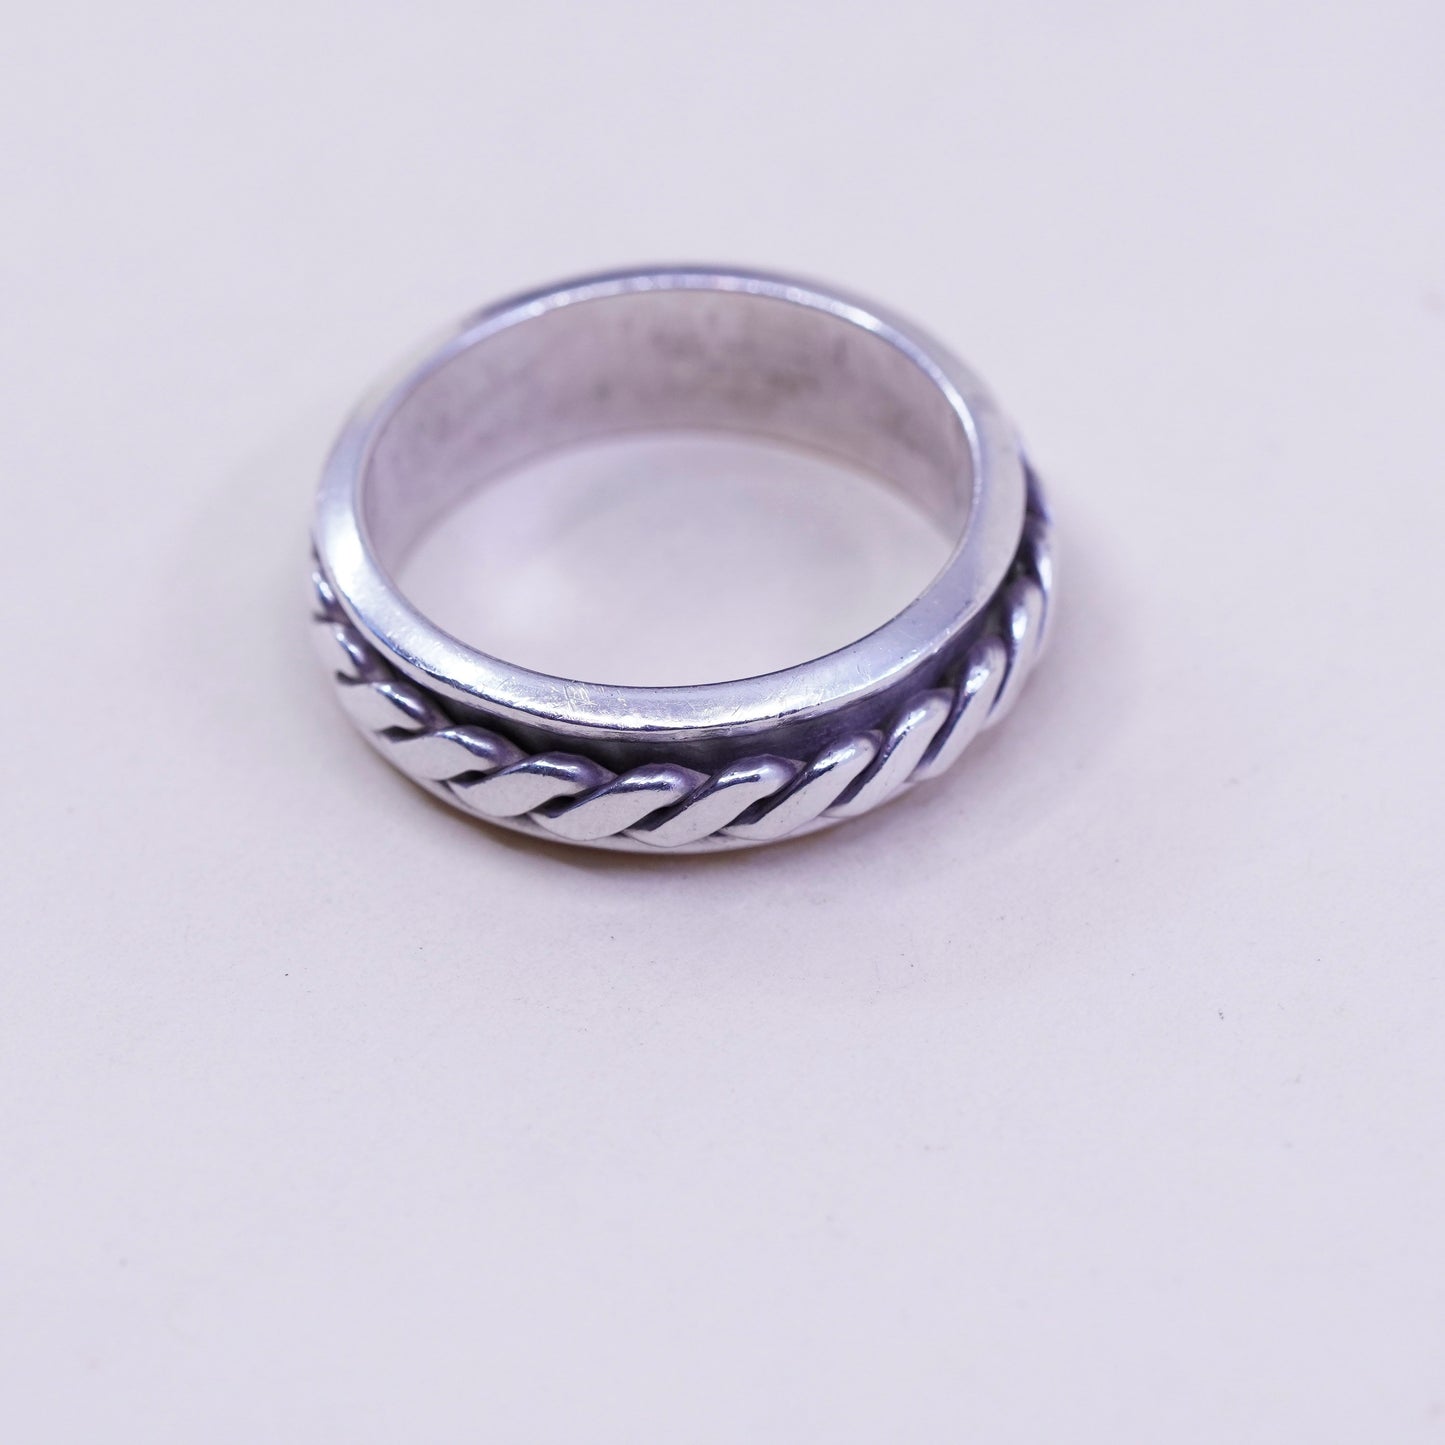 Size 14, vintage sterling silver handmade ring, 925 spinner roller band cable